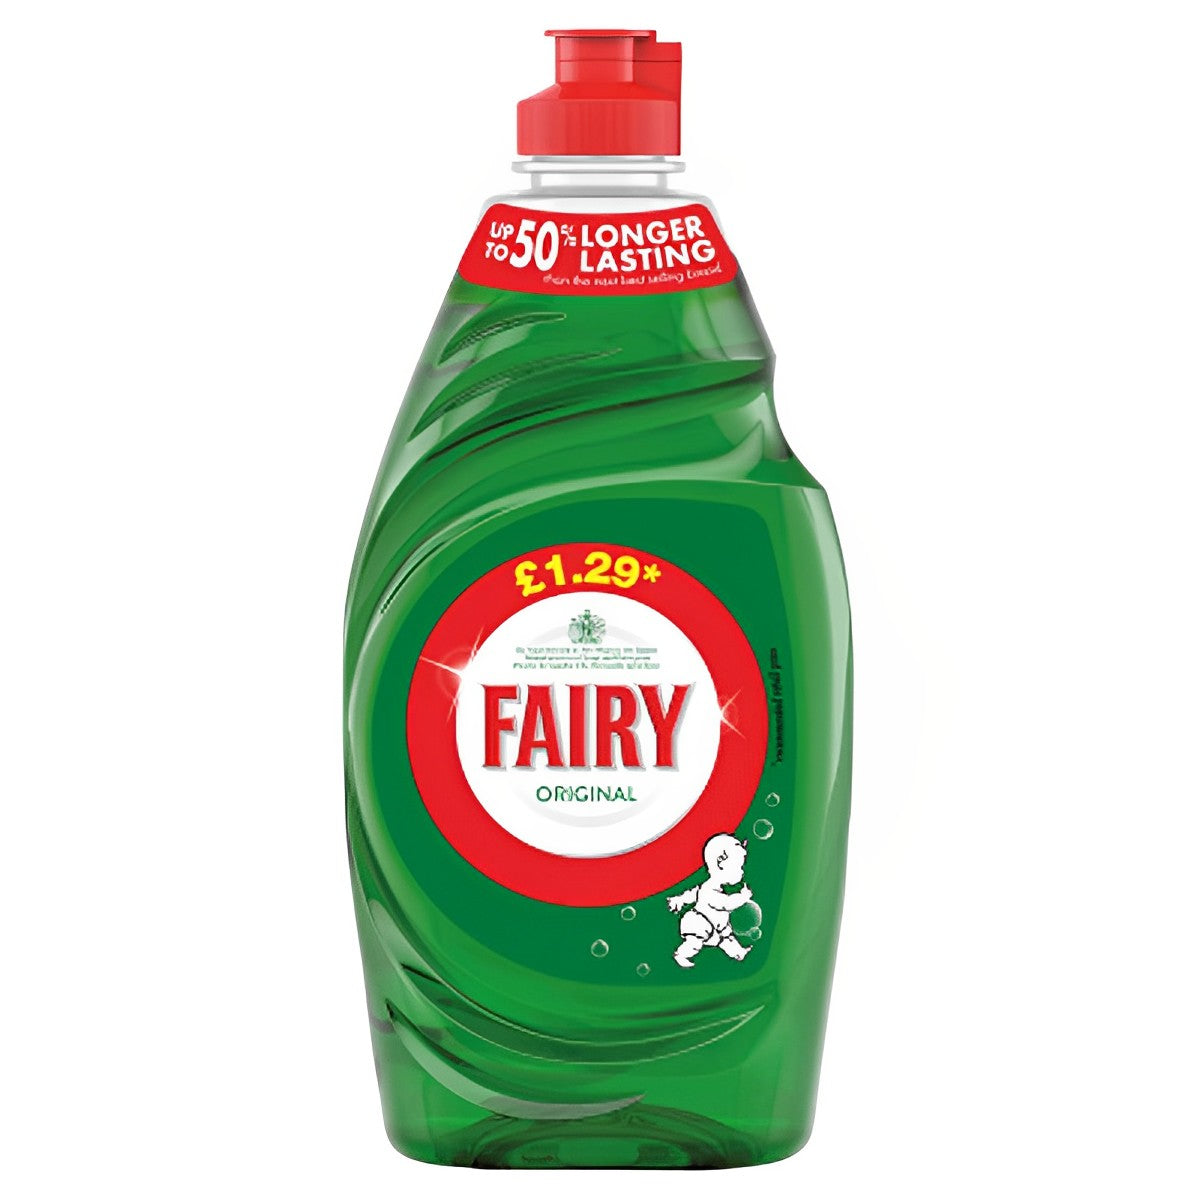 Fairy - Original Washing Up Liquid Green with LiftAction - 383ml - Continental Food Store